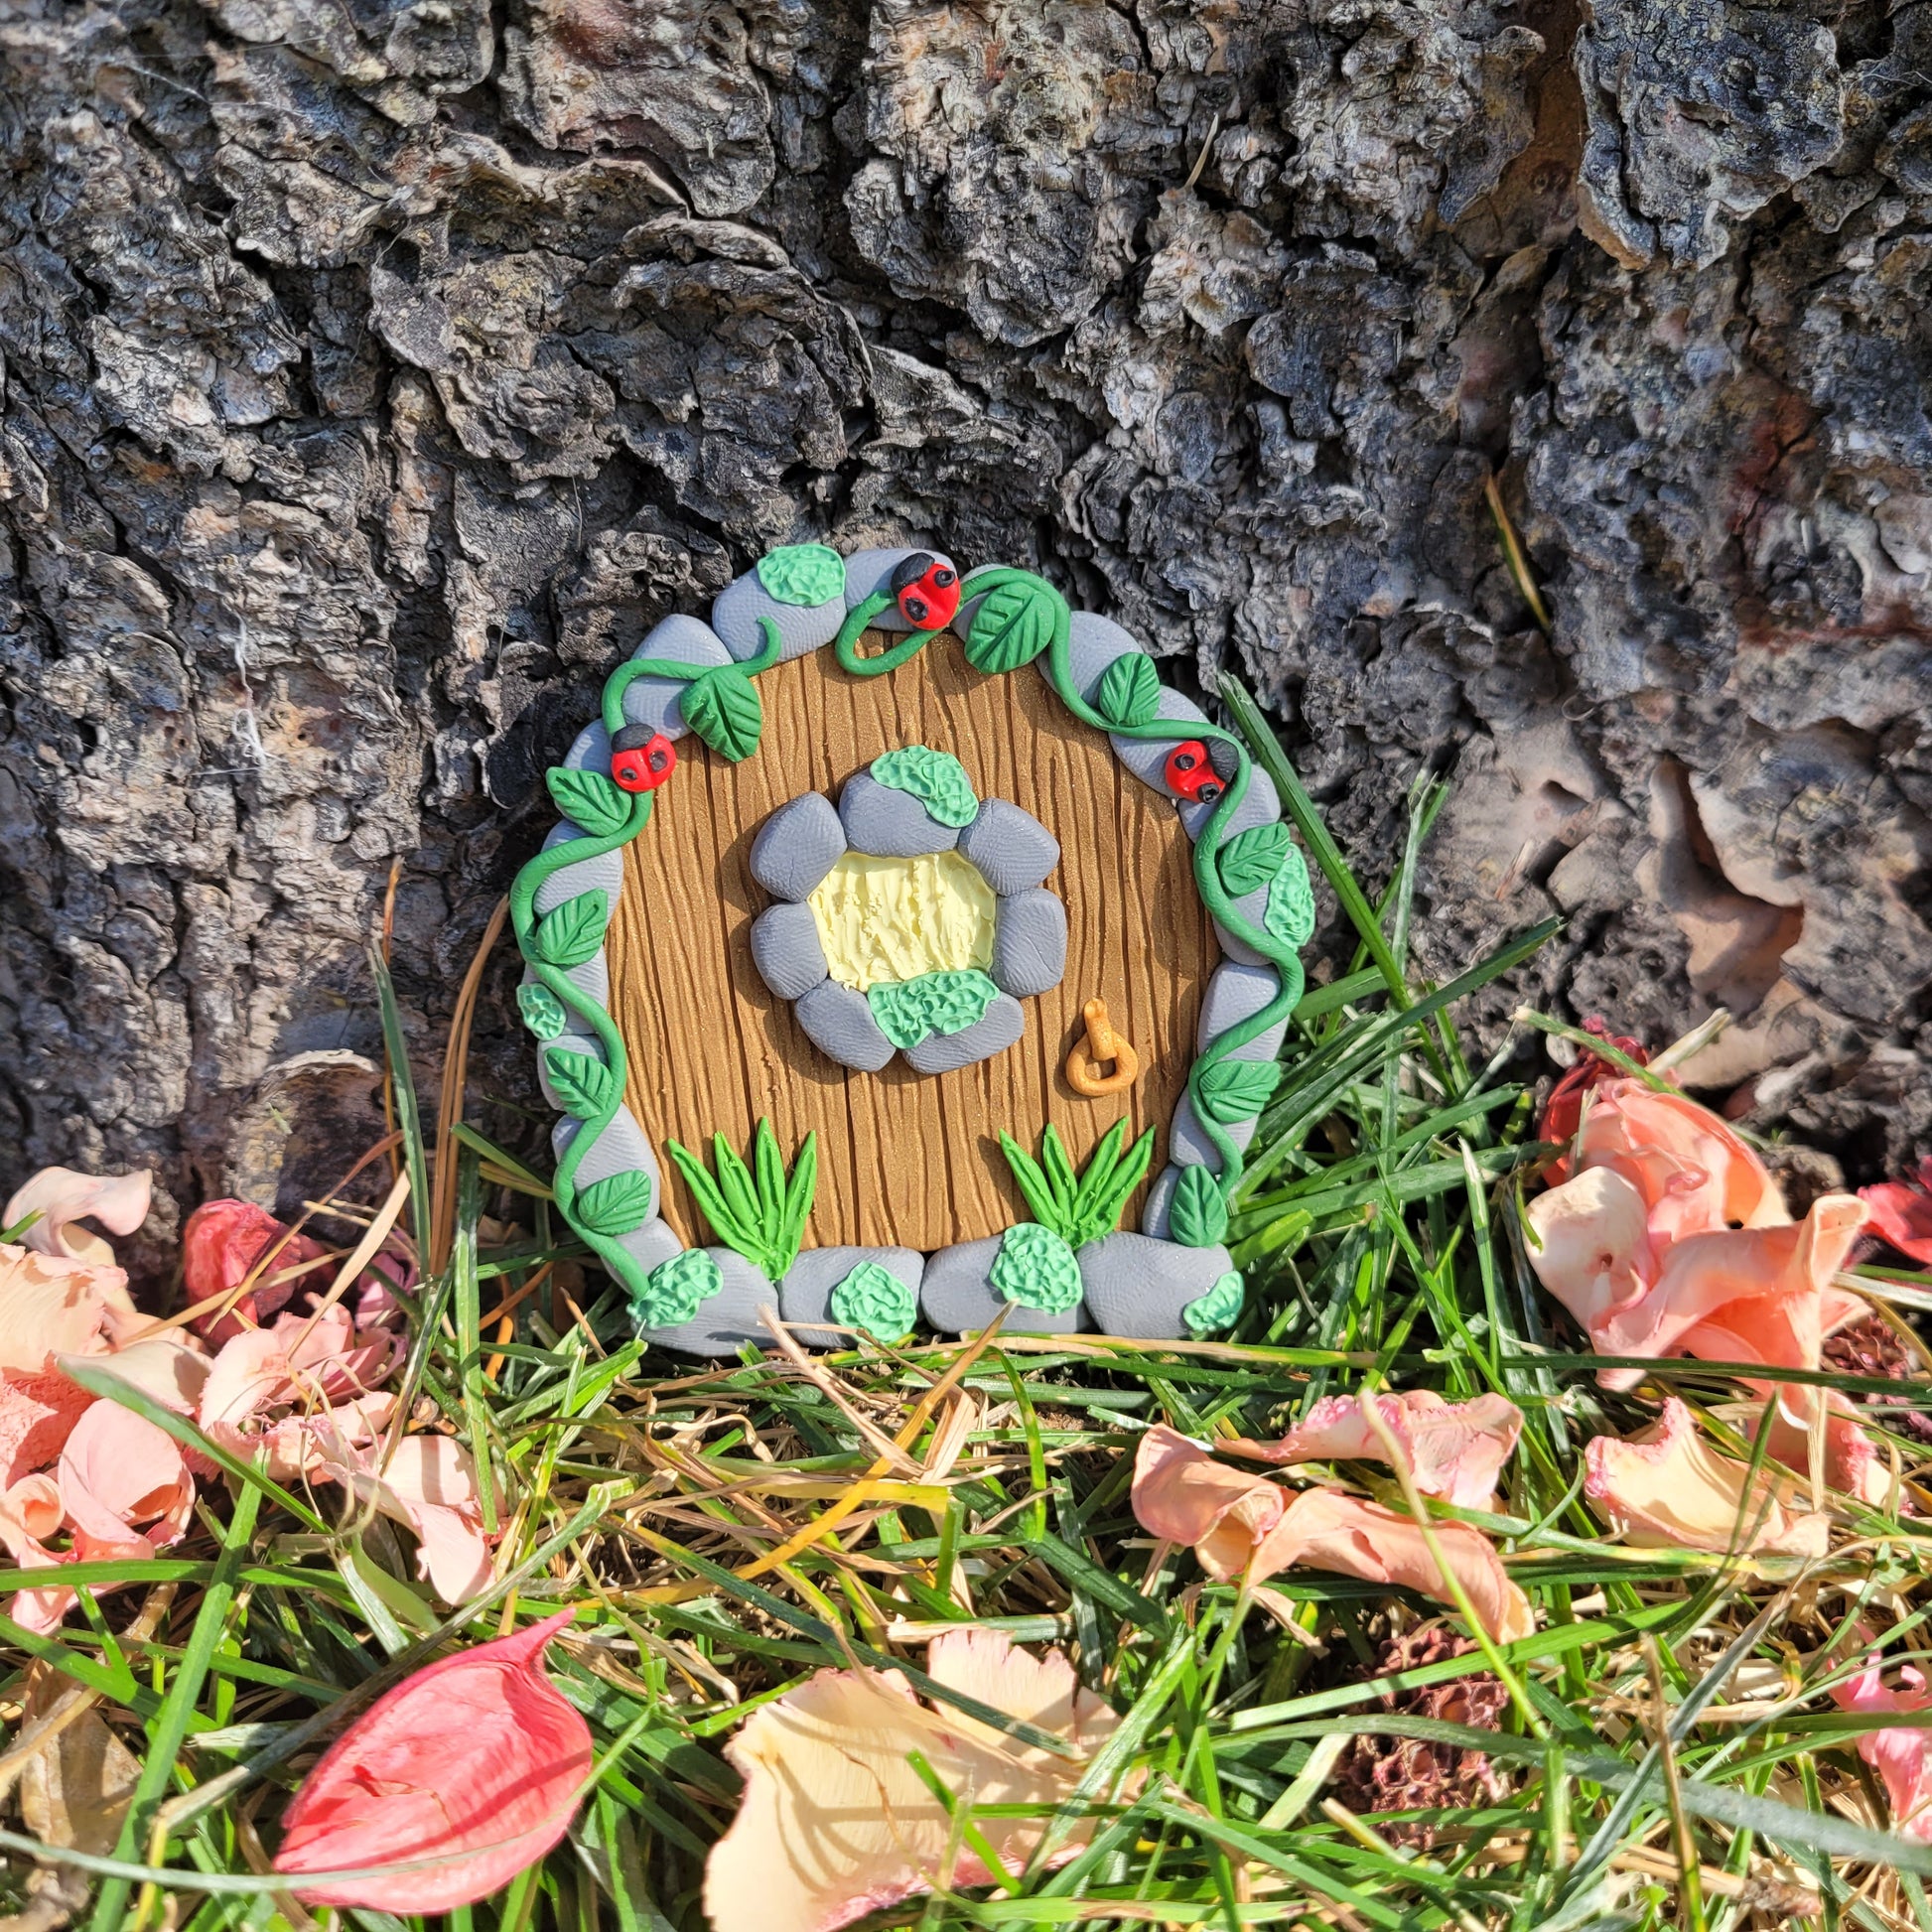 The ladybug fairy door rests against the bark of a tree outside surrounded by green grass and pink flower petals. The mini ladybug door is brown wood patterned with grey cobblestone finish, a window and a door knob. It is detailed with green grass, moss, vines and, of course, ladybugs!